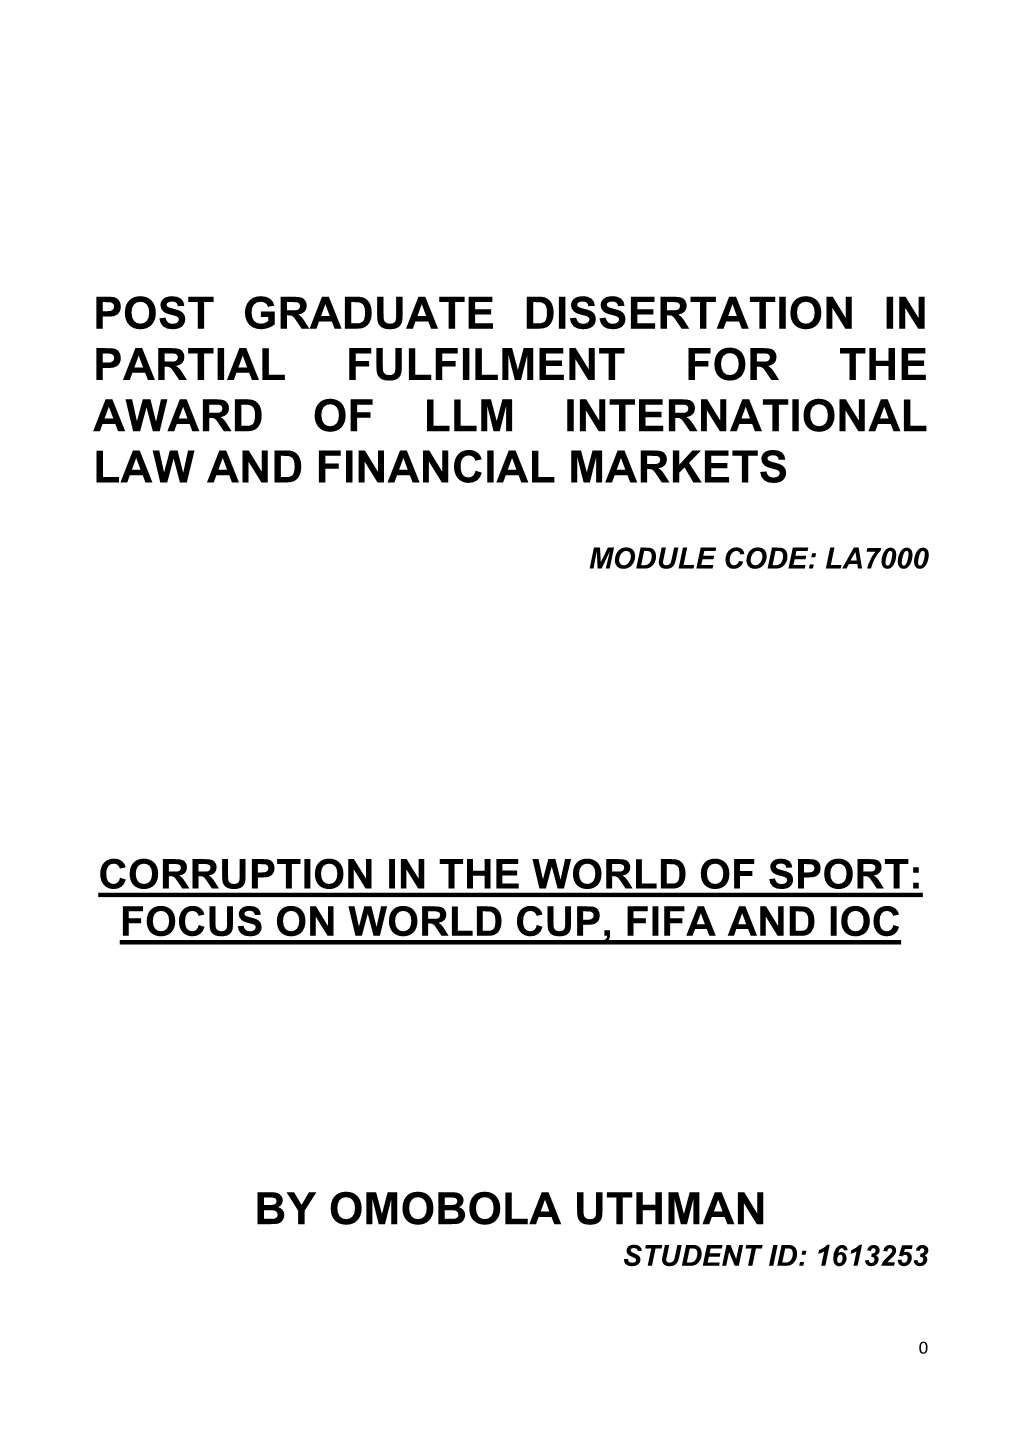 Post Graduate Dissertation in Partial Fulfilment for the Award of Llm International Law and Financial Markets by Omobola Uthman